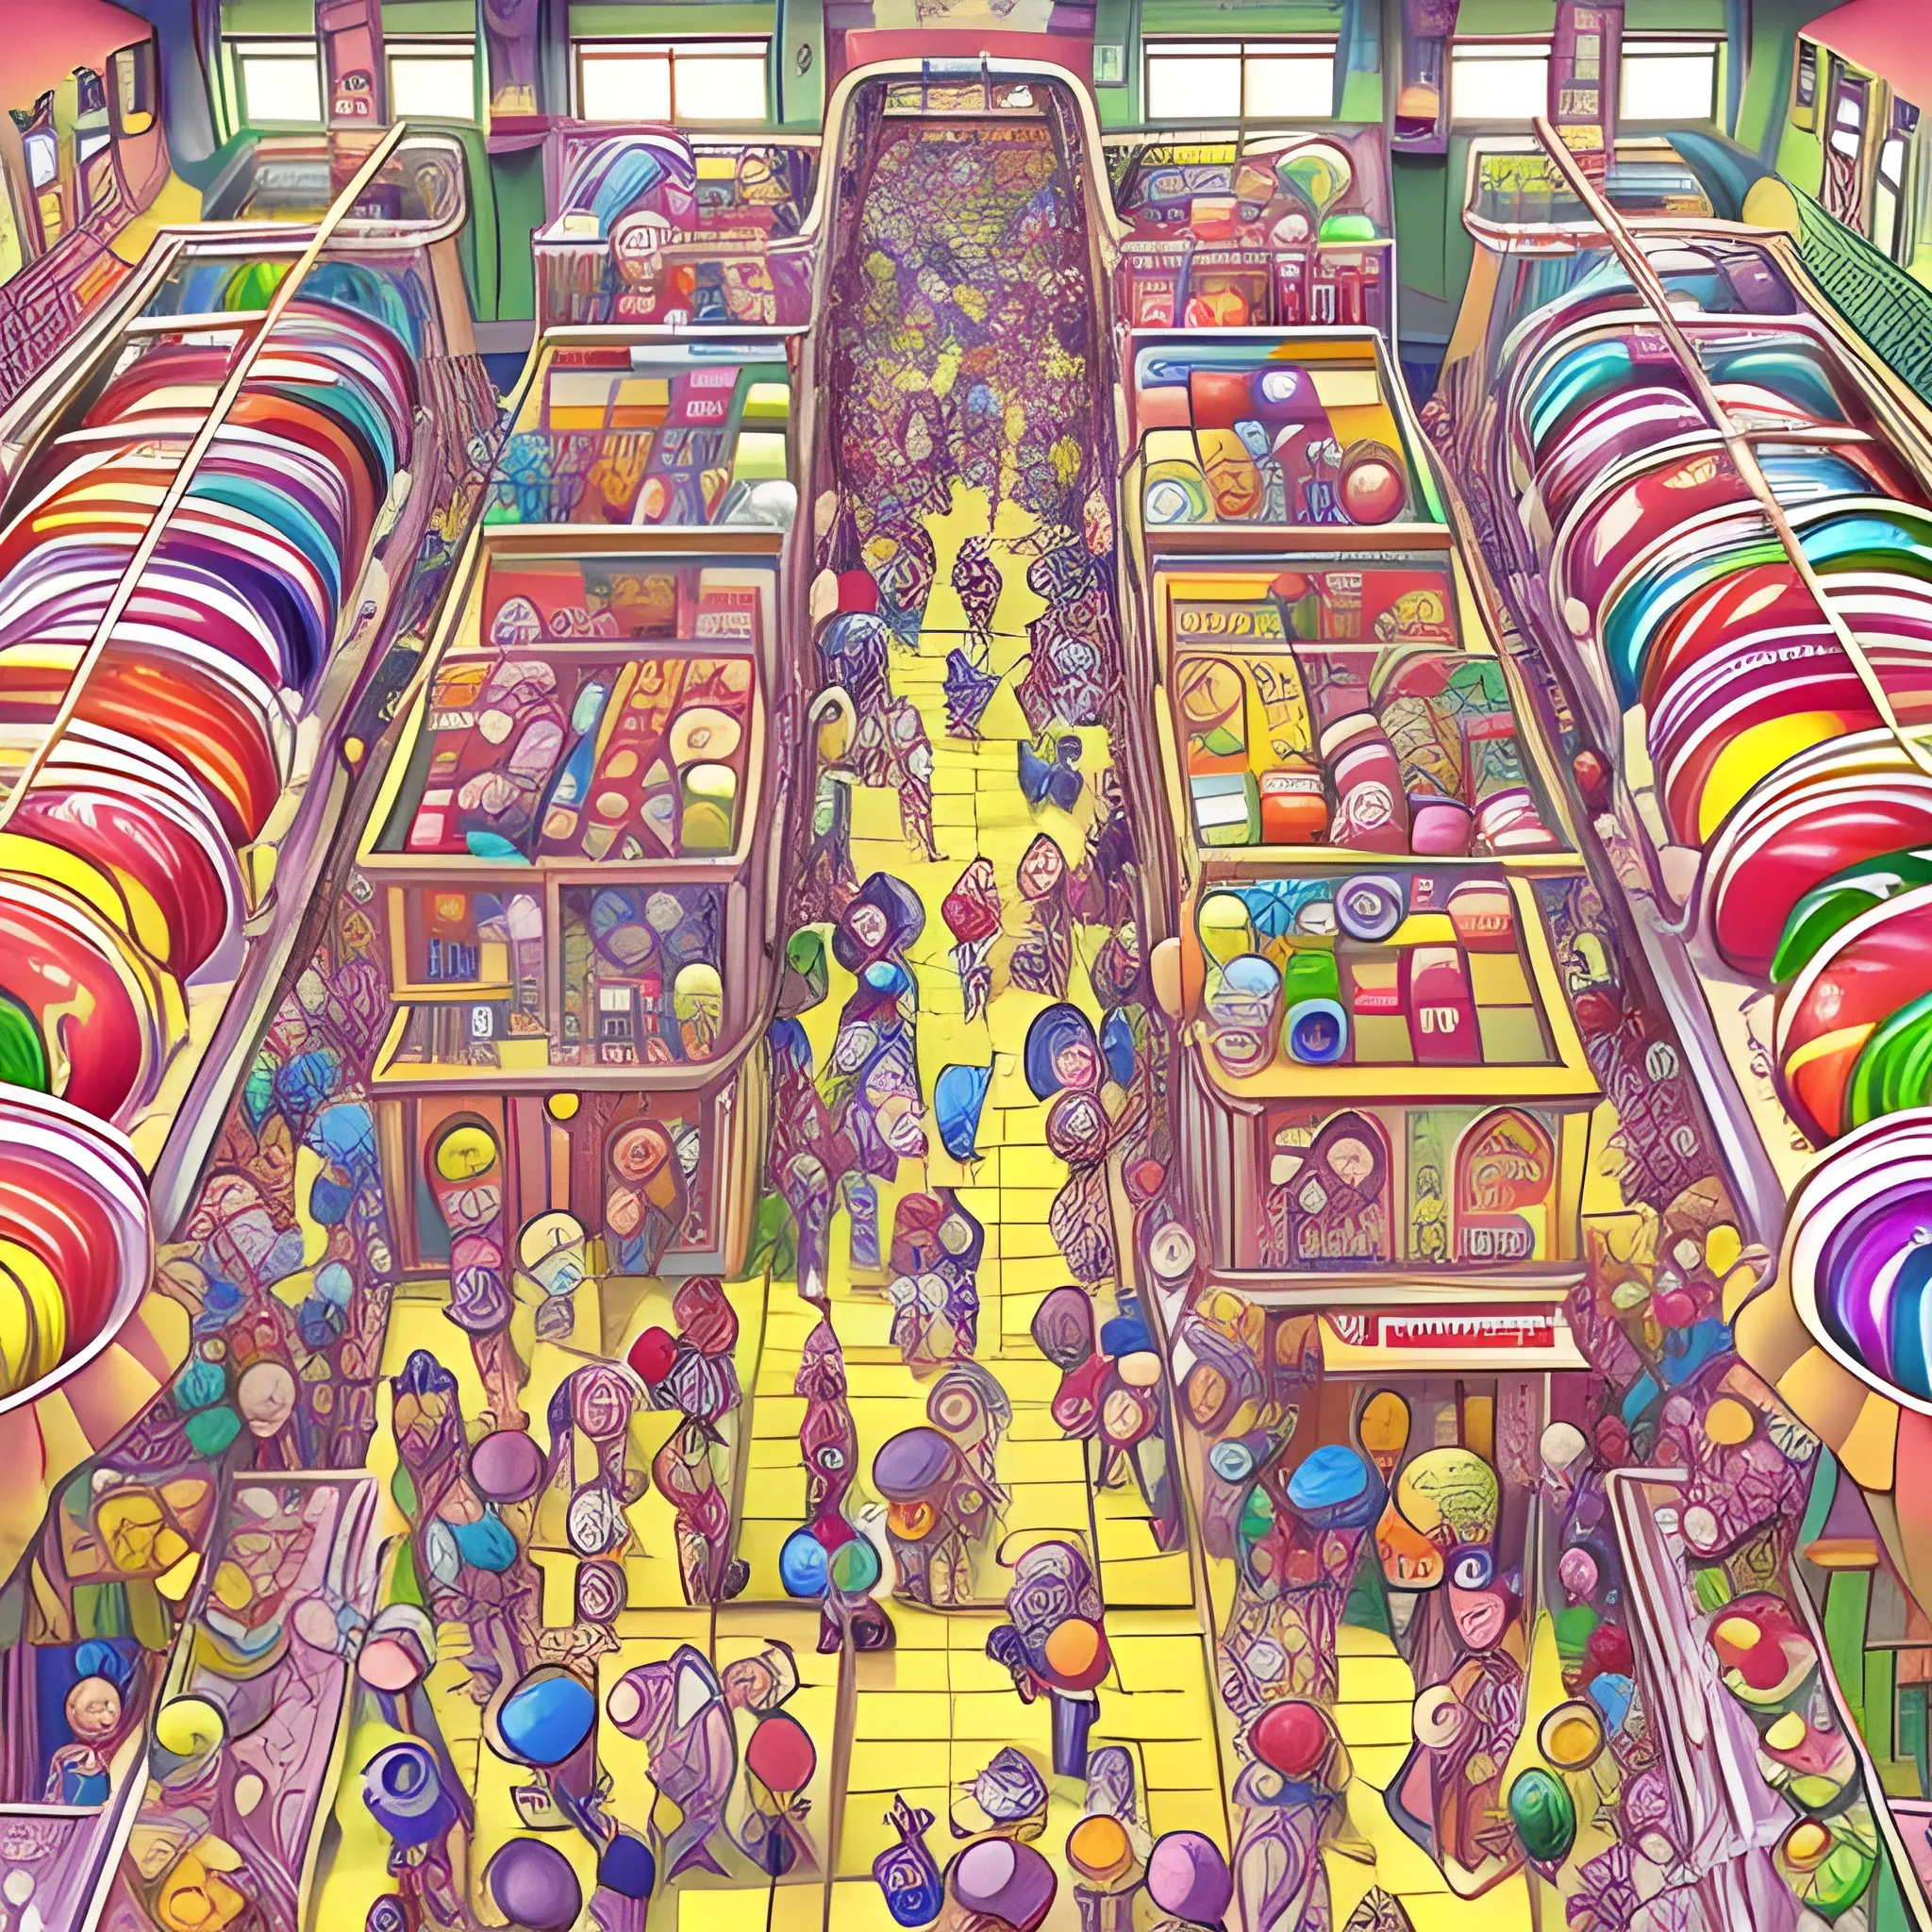 a crowded scene in an candy factory, open plan, top view, by jeff carslile, colorful, intricate, highly detailed, rich colors,  cartoonish, studio ghibli, where's waldo style, Cartoon